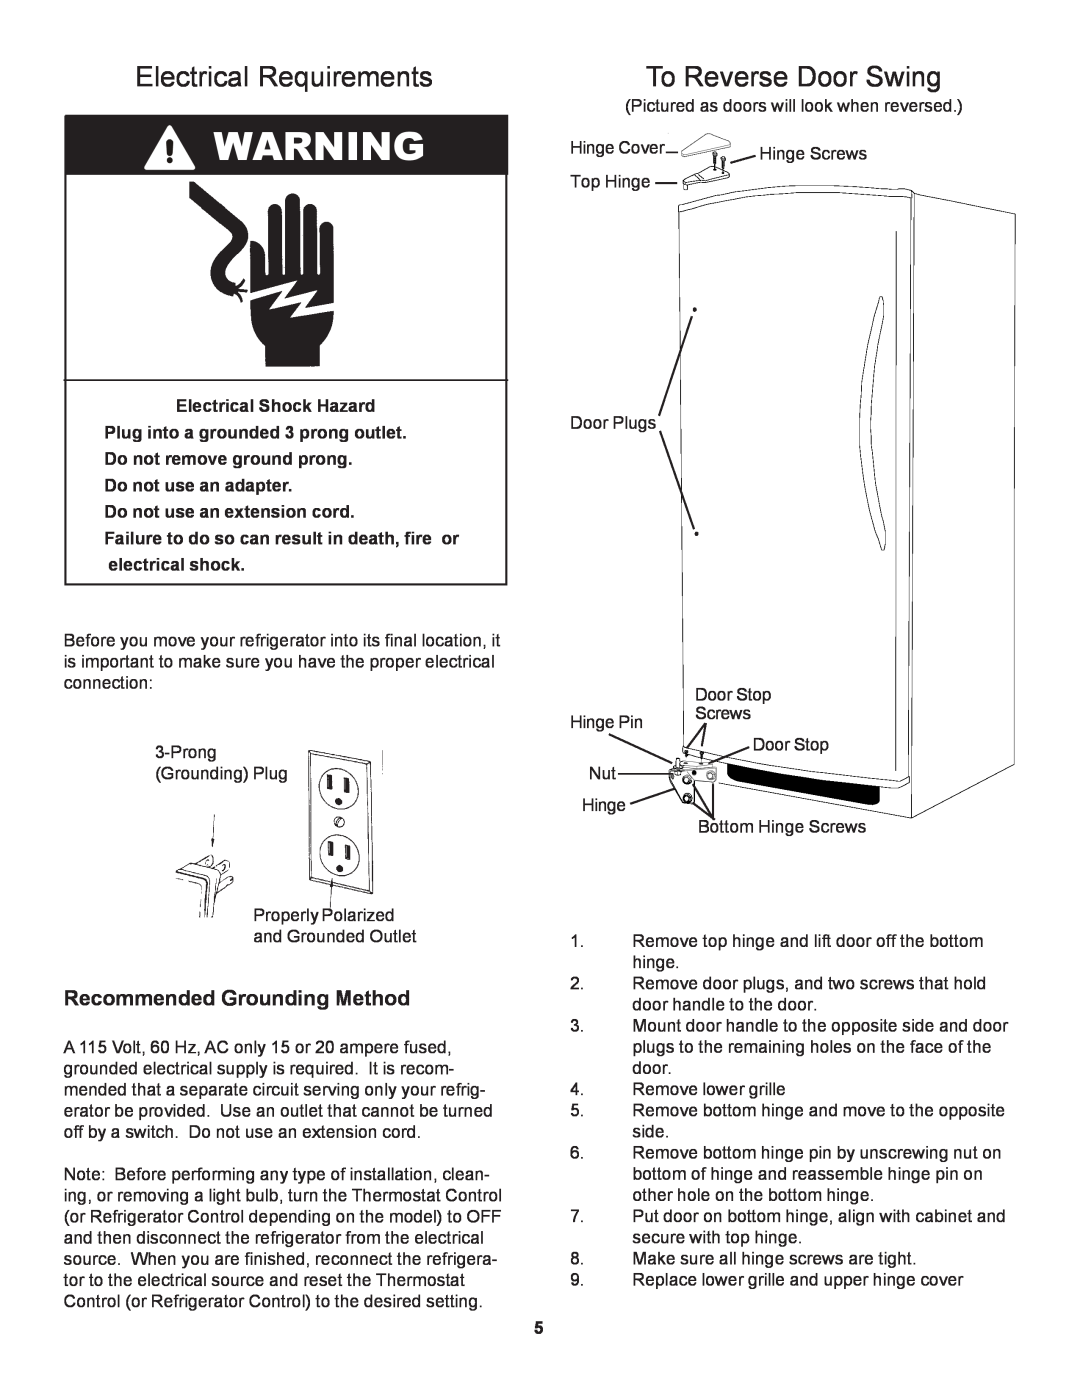 Danby D1866WE manual Electrical Requirements, To Reverse Door Swing, Recommended Grounding Method 